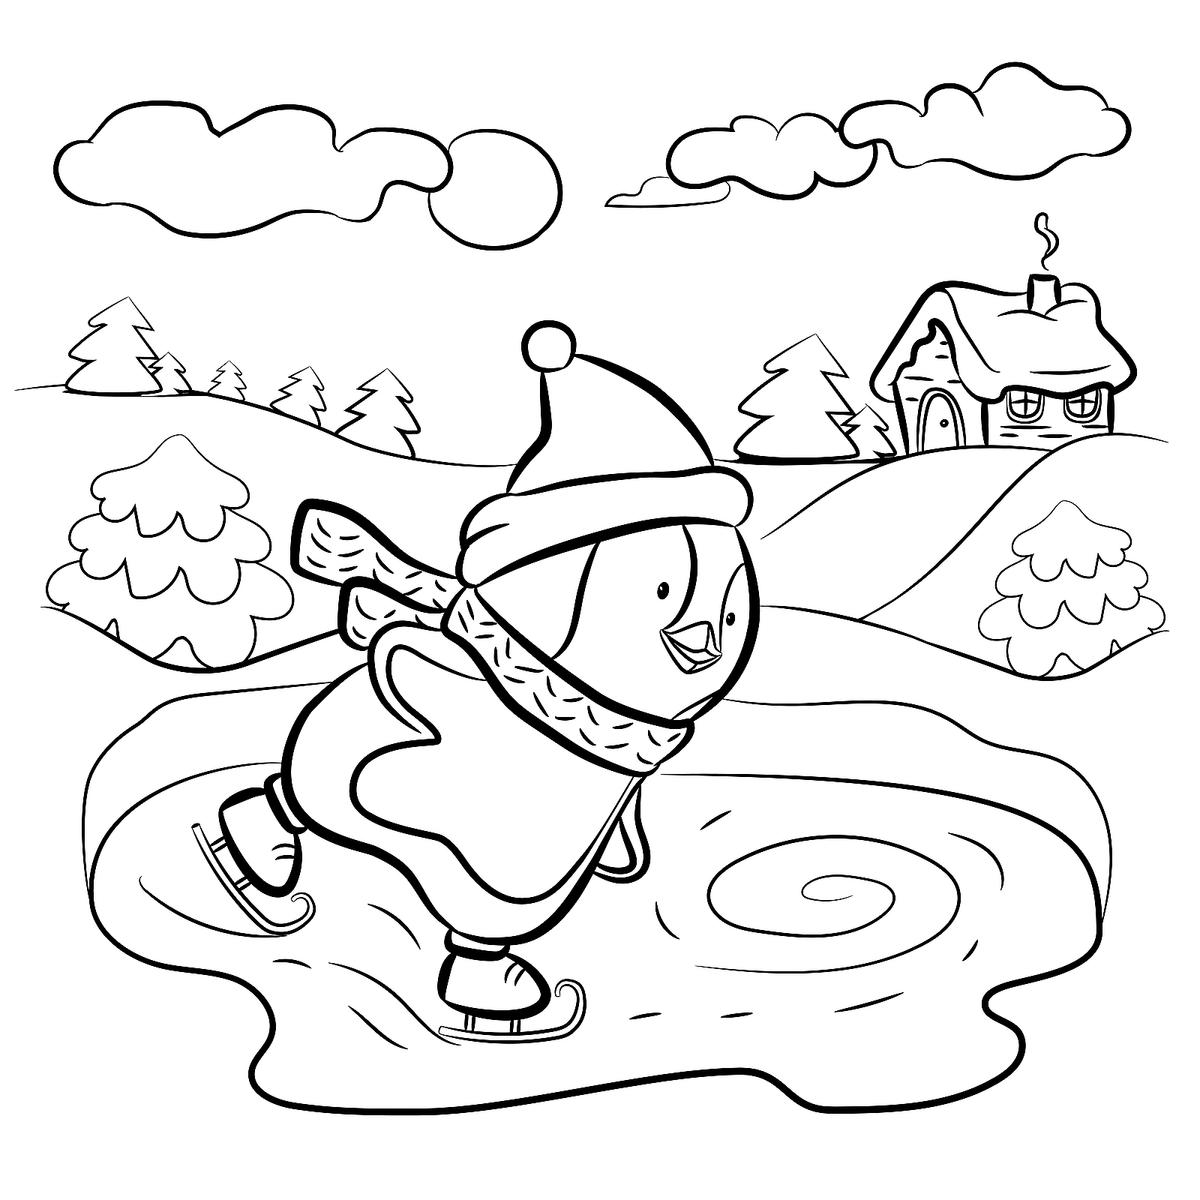 Winter Puzzle & Coloring Pages: Printable Winter-Themed Activity ...